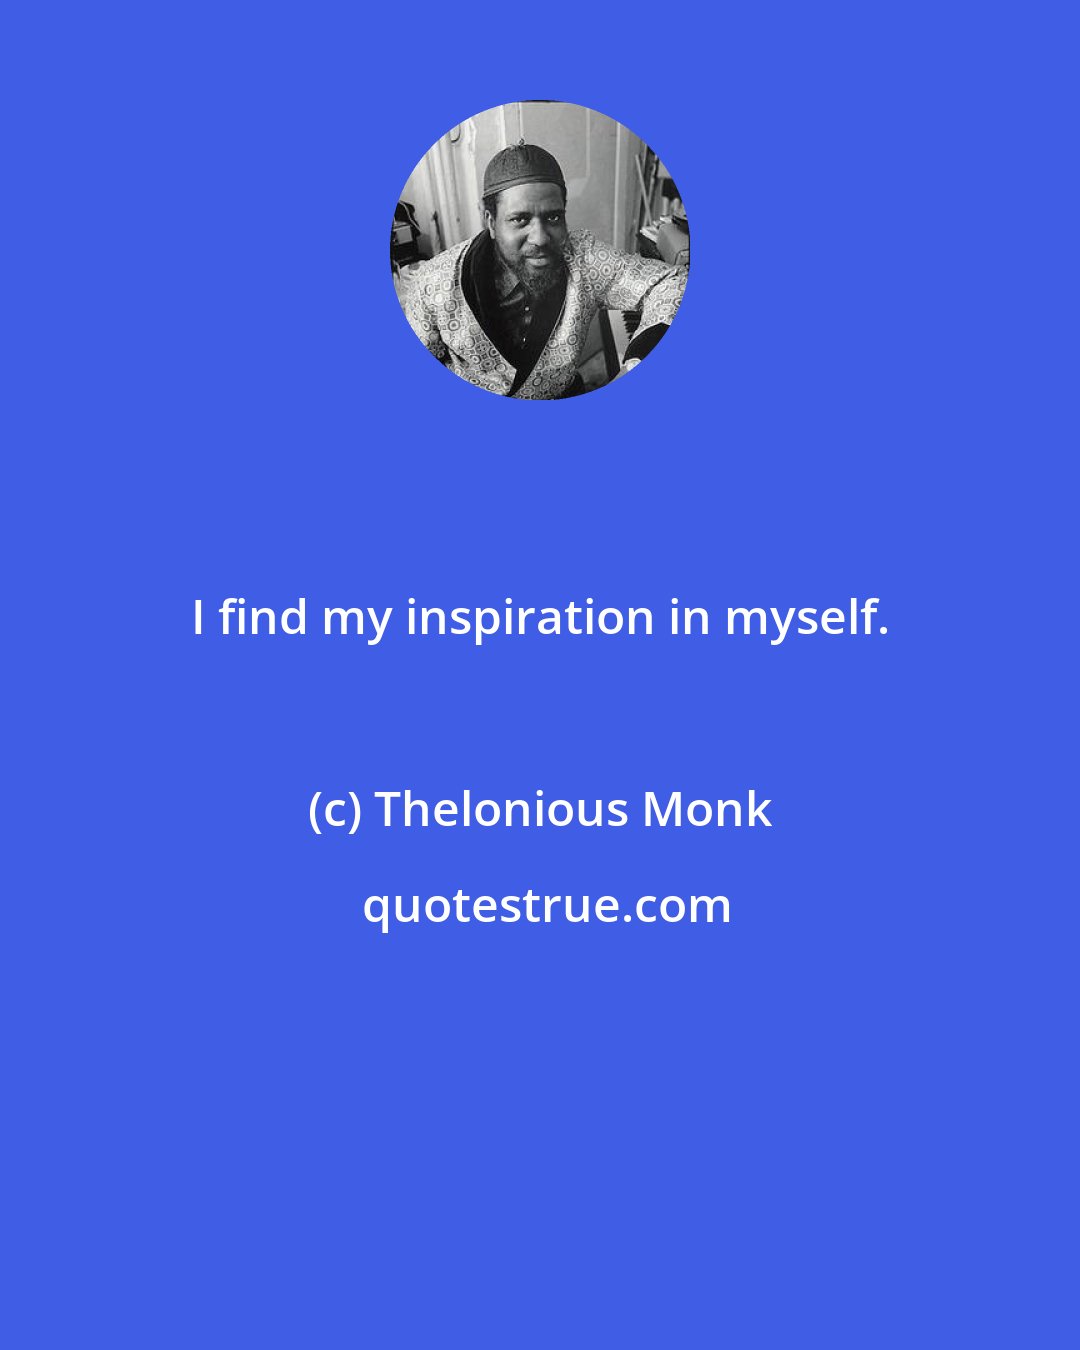 Thelonious Monk: I find my inspiration in myself.